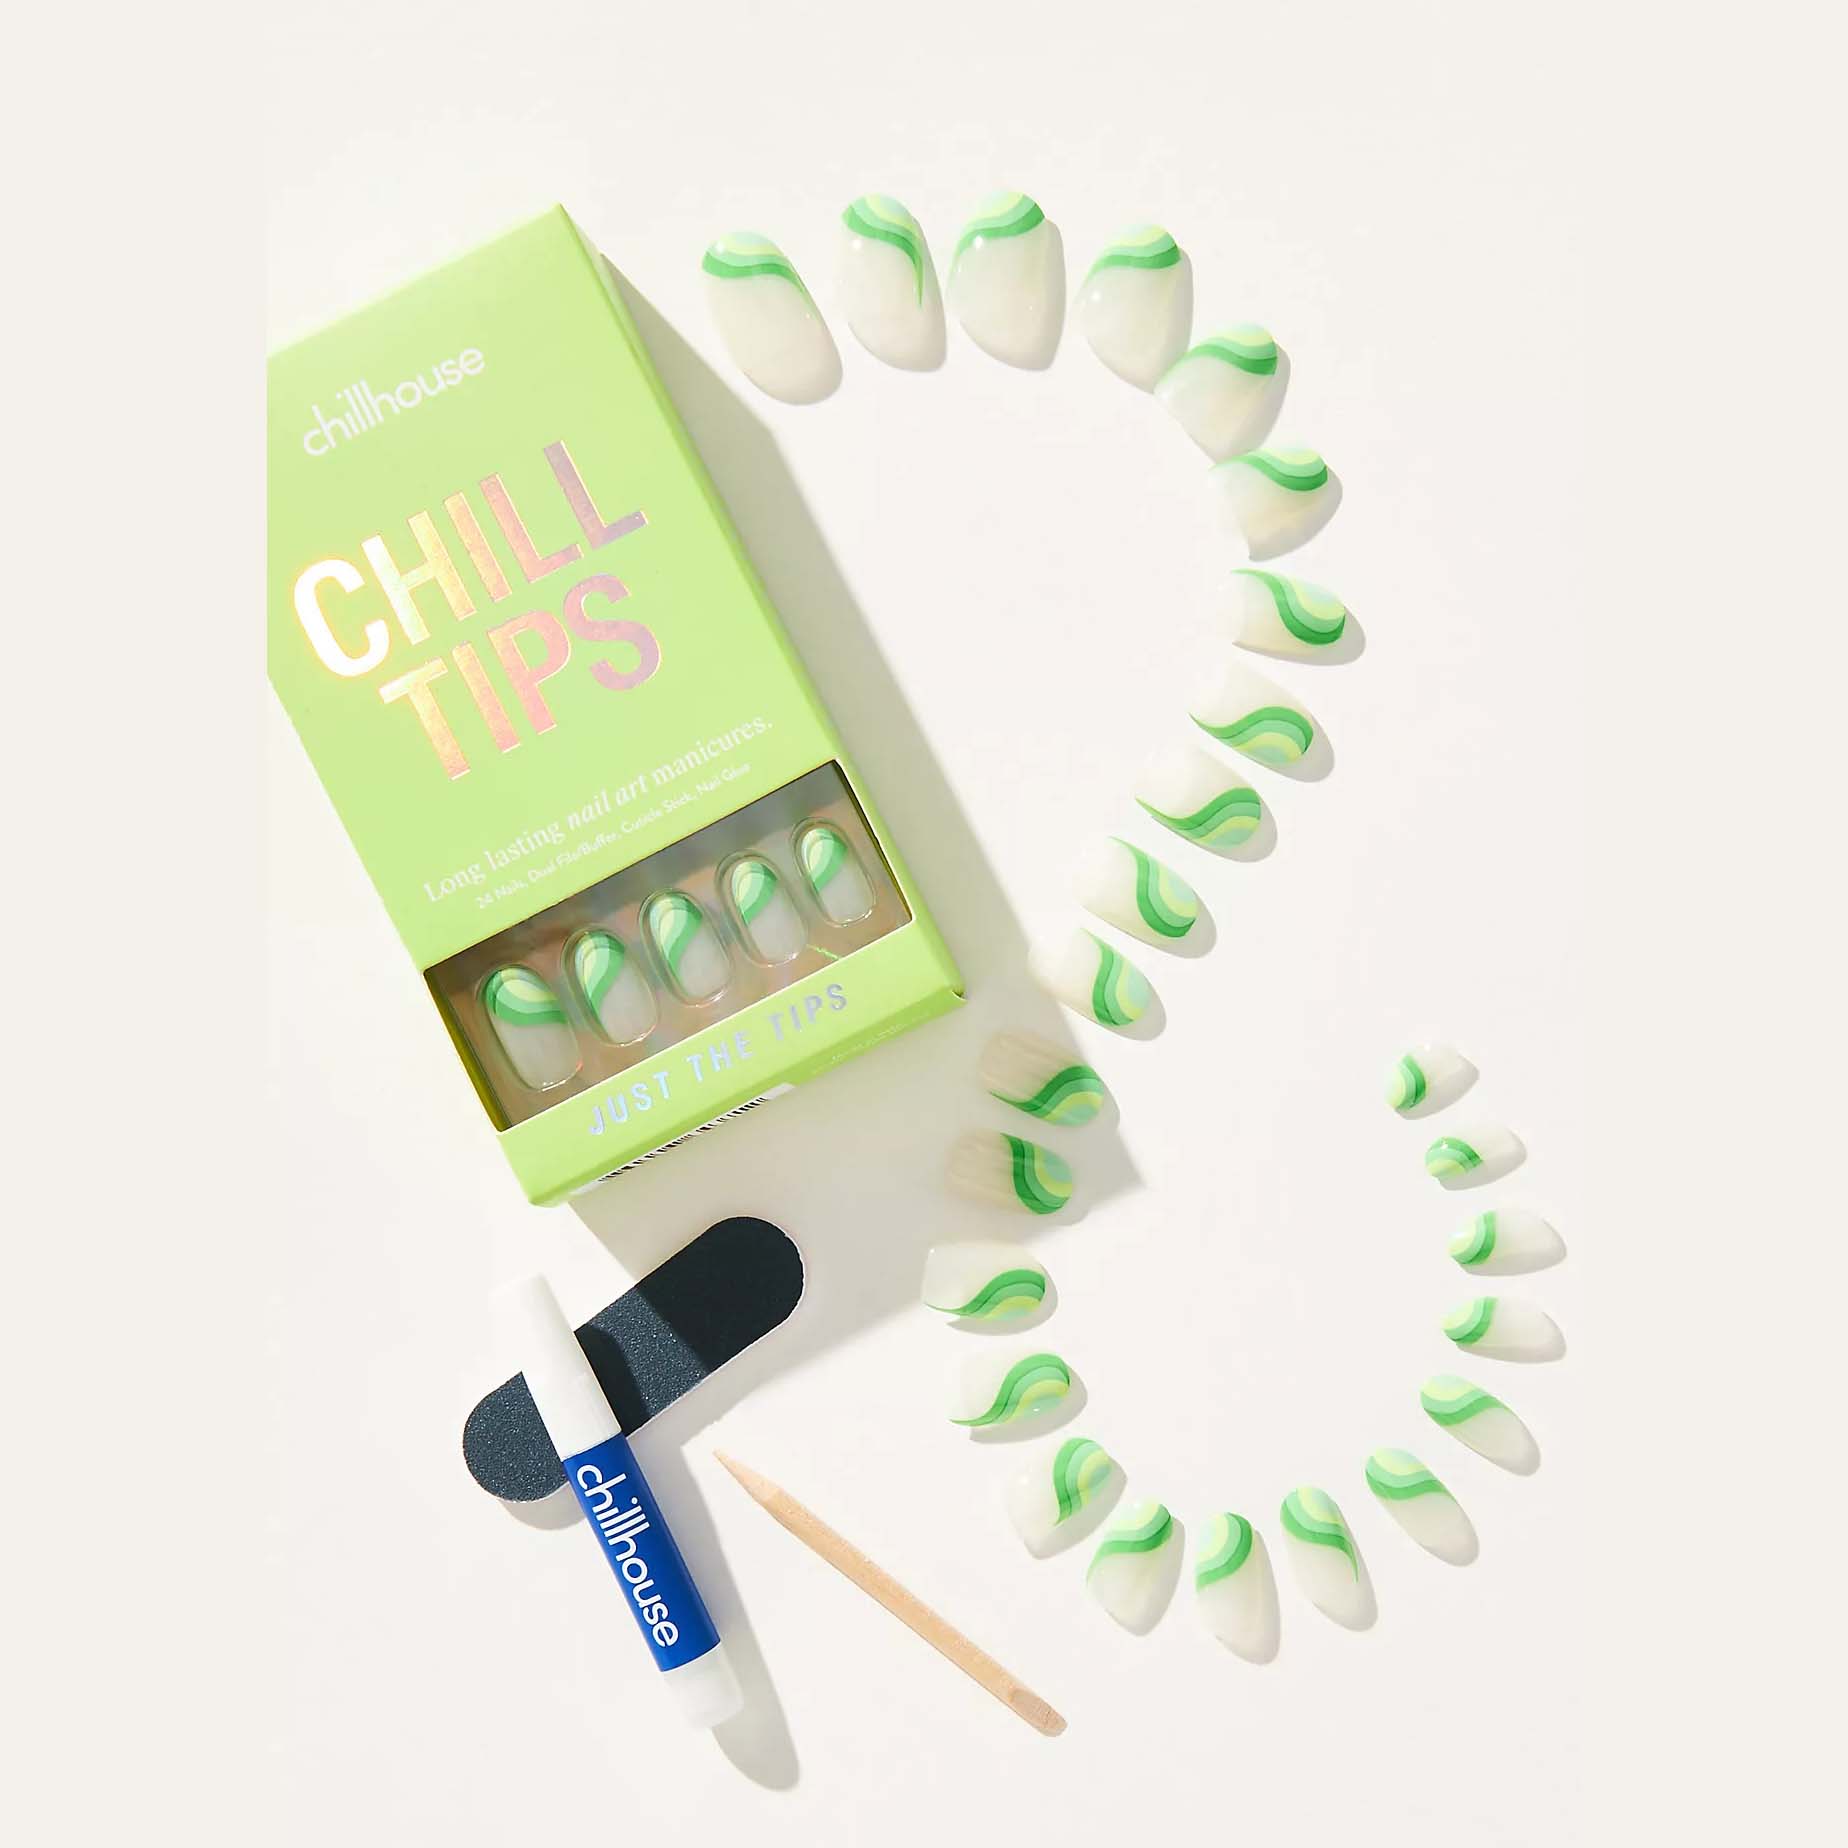 Chillhouse Chill Tips Press-On Nail Set with green ombre nails